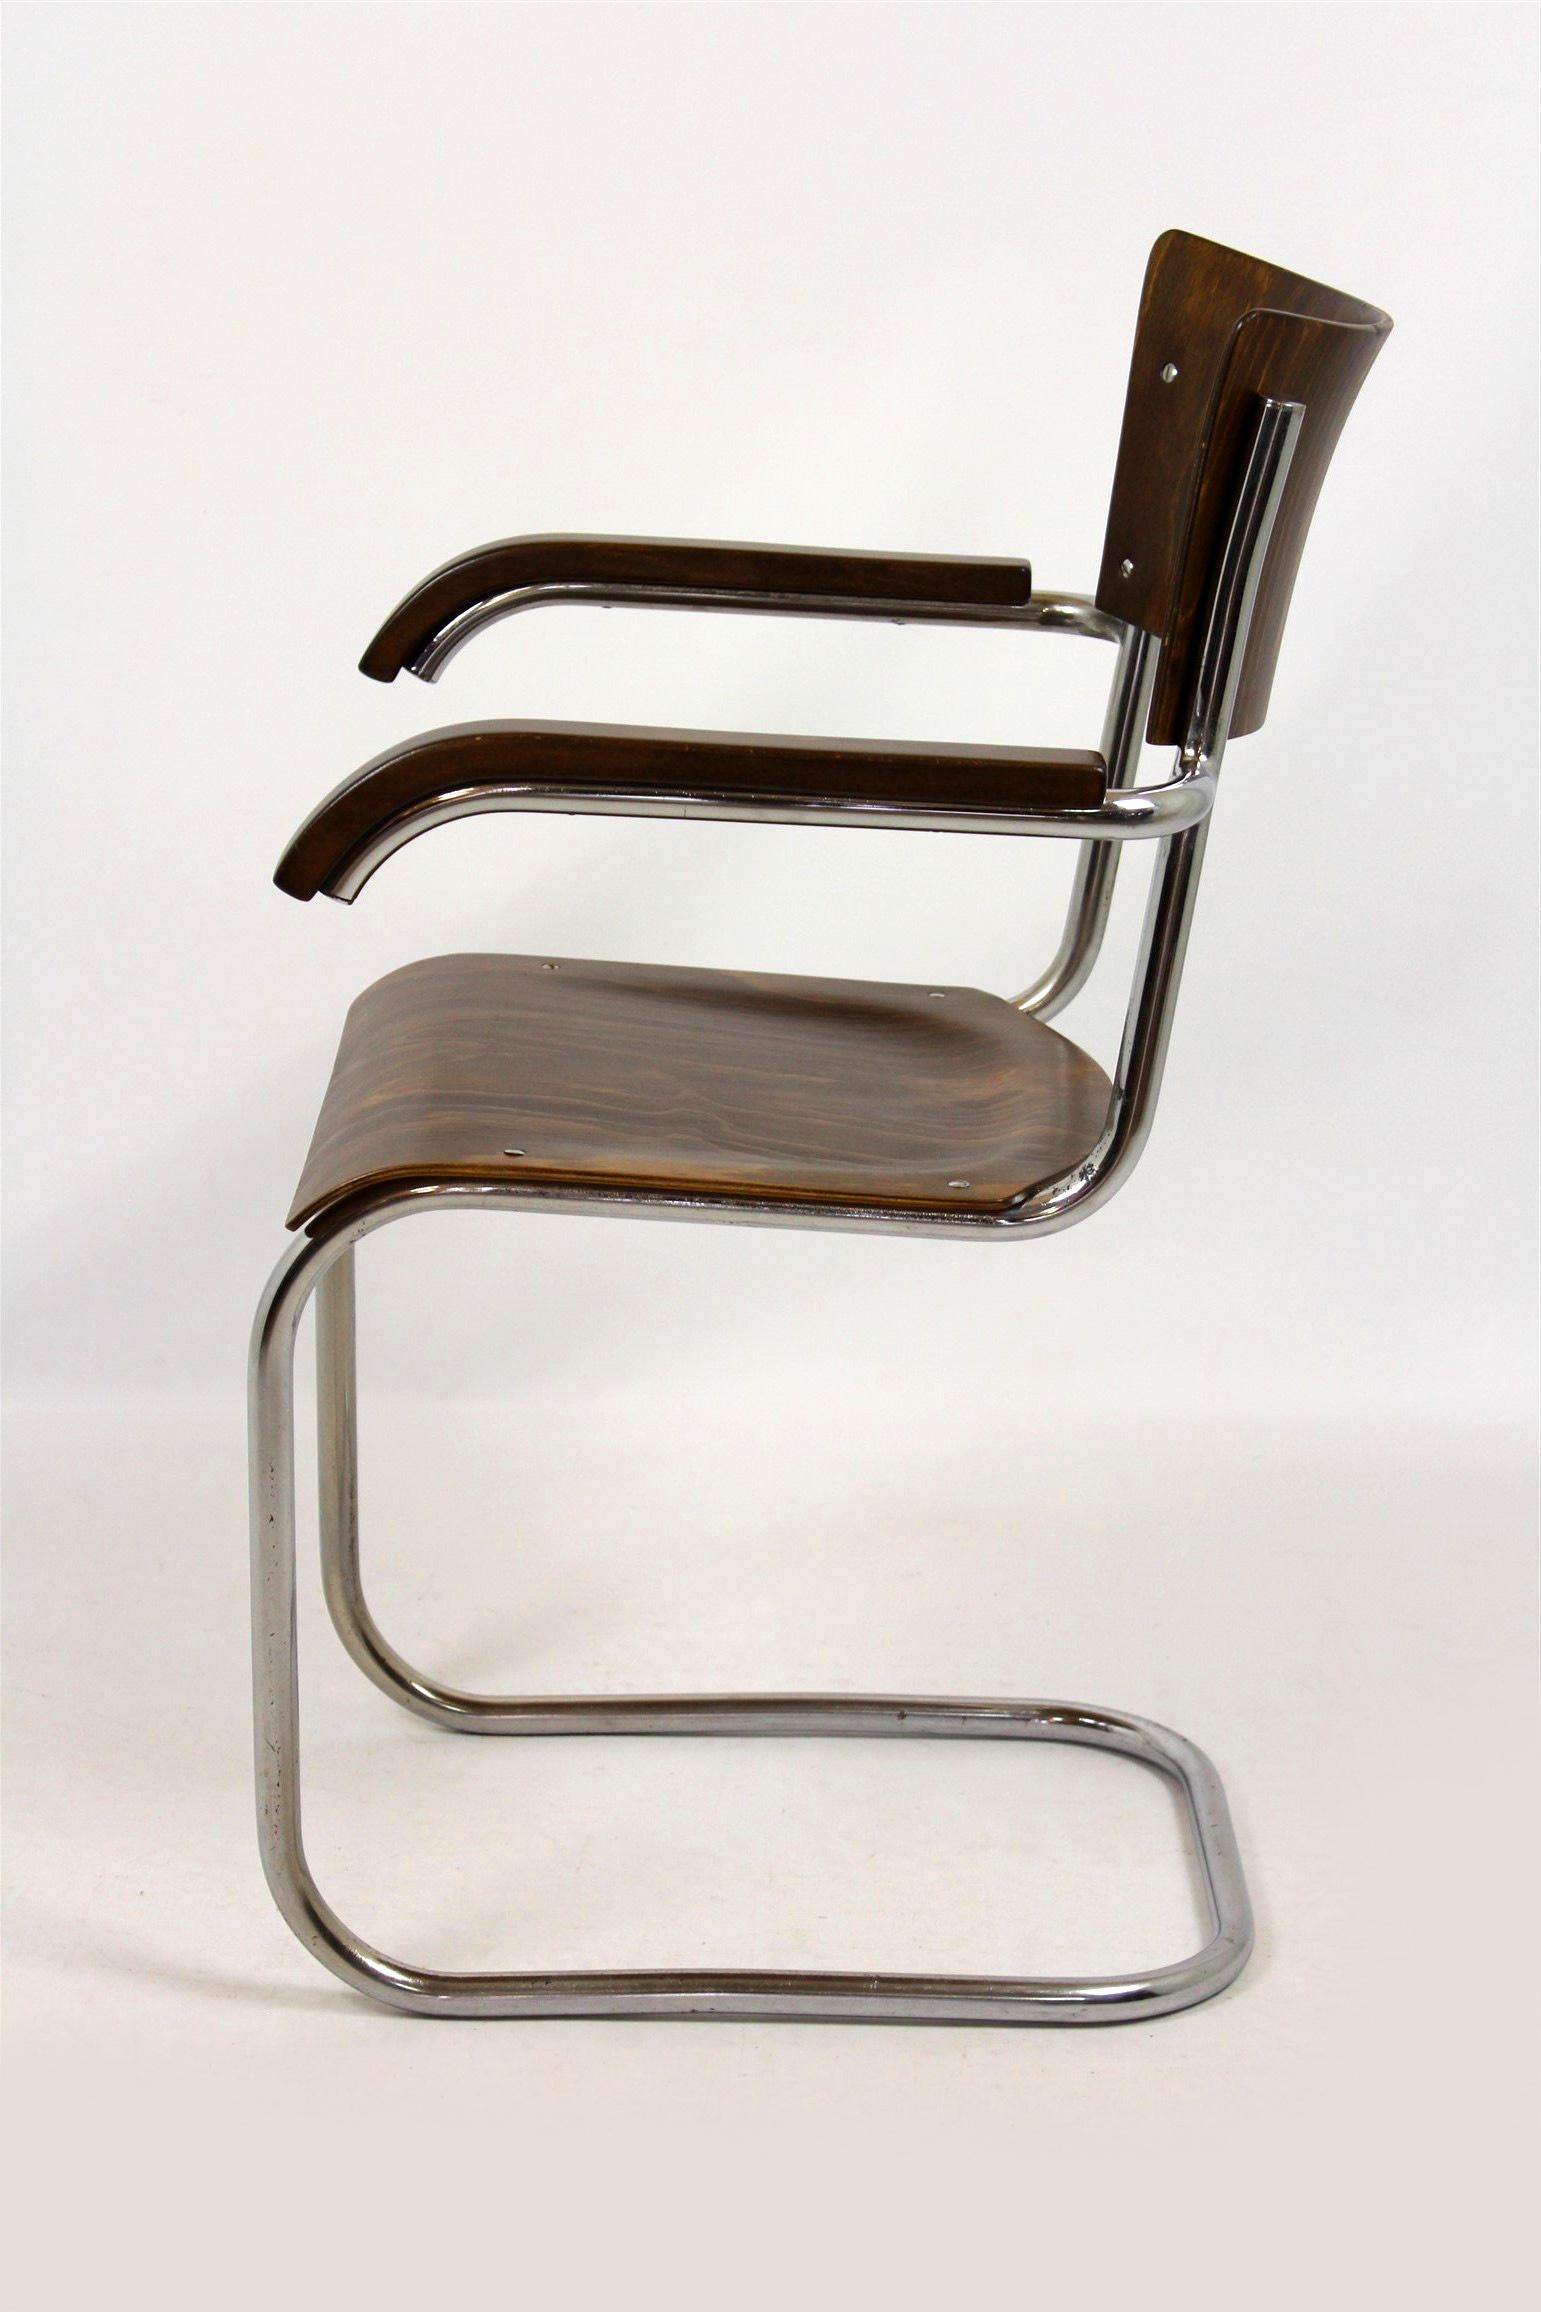 Bauhaus Fn 6 Cantilever Chair by Mart Stam for Mücke-Melder, 1930s For Sale